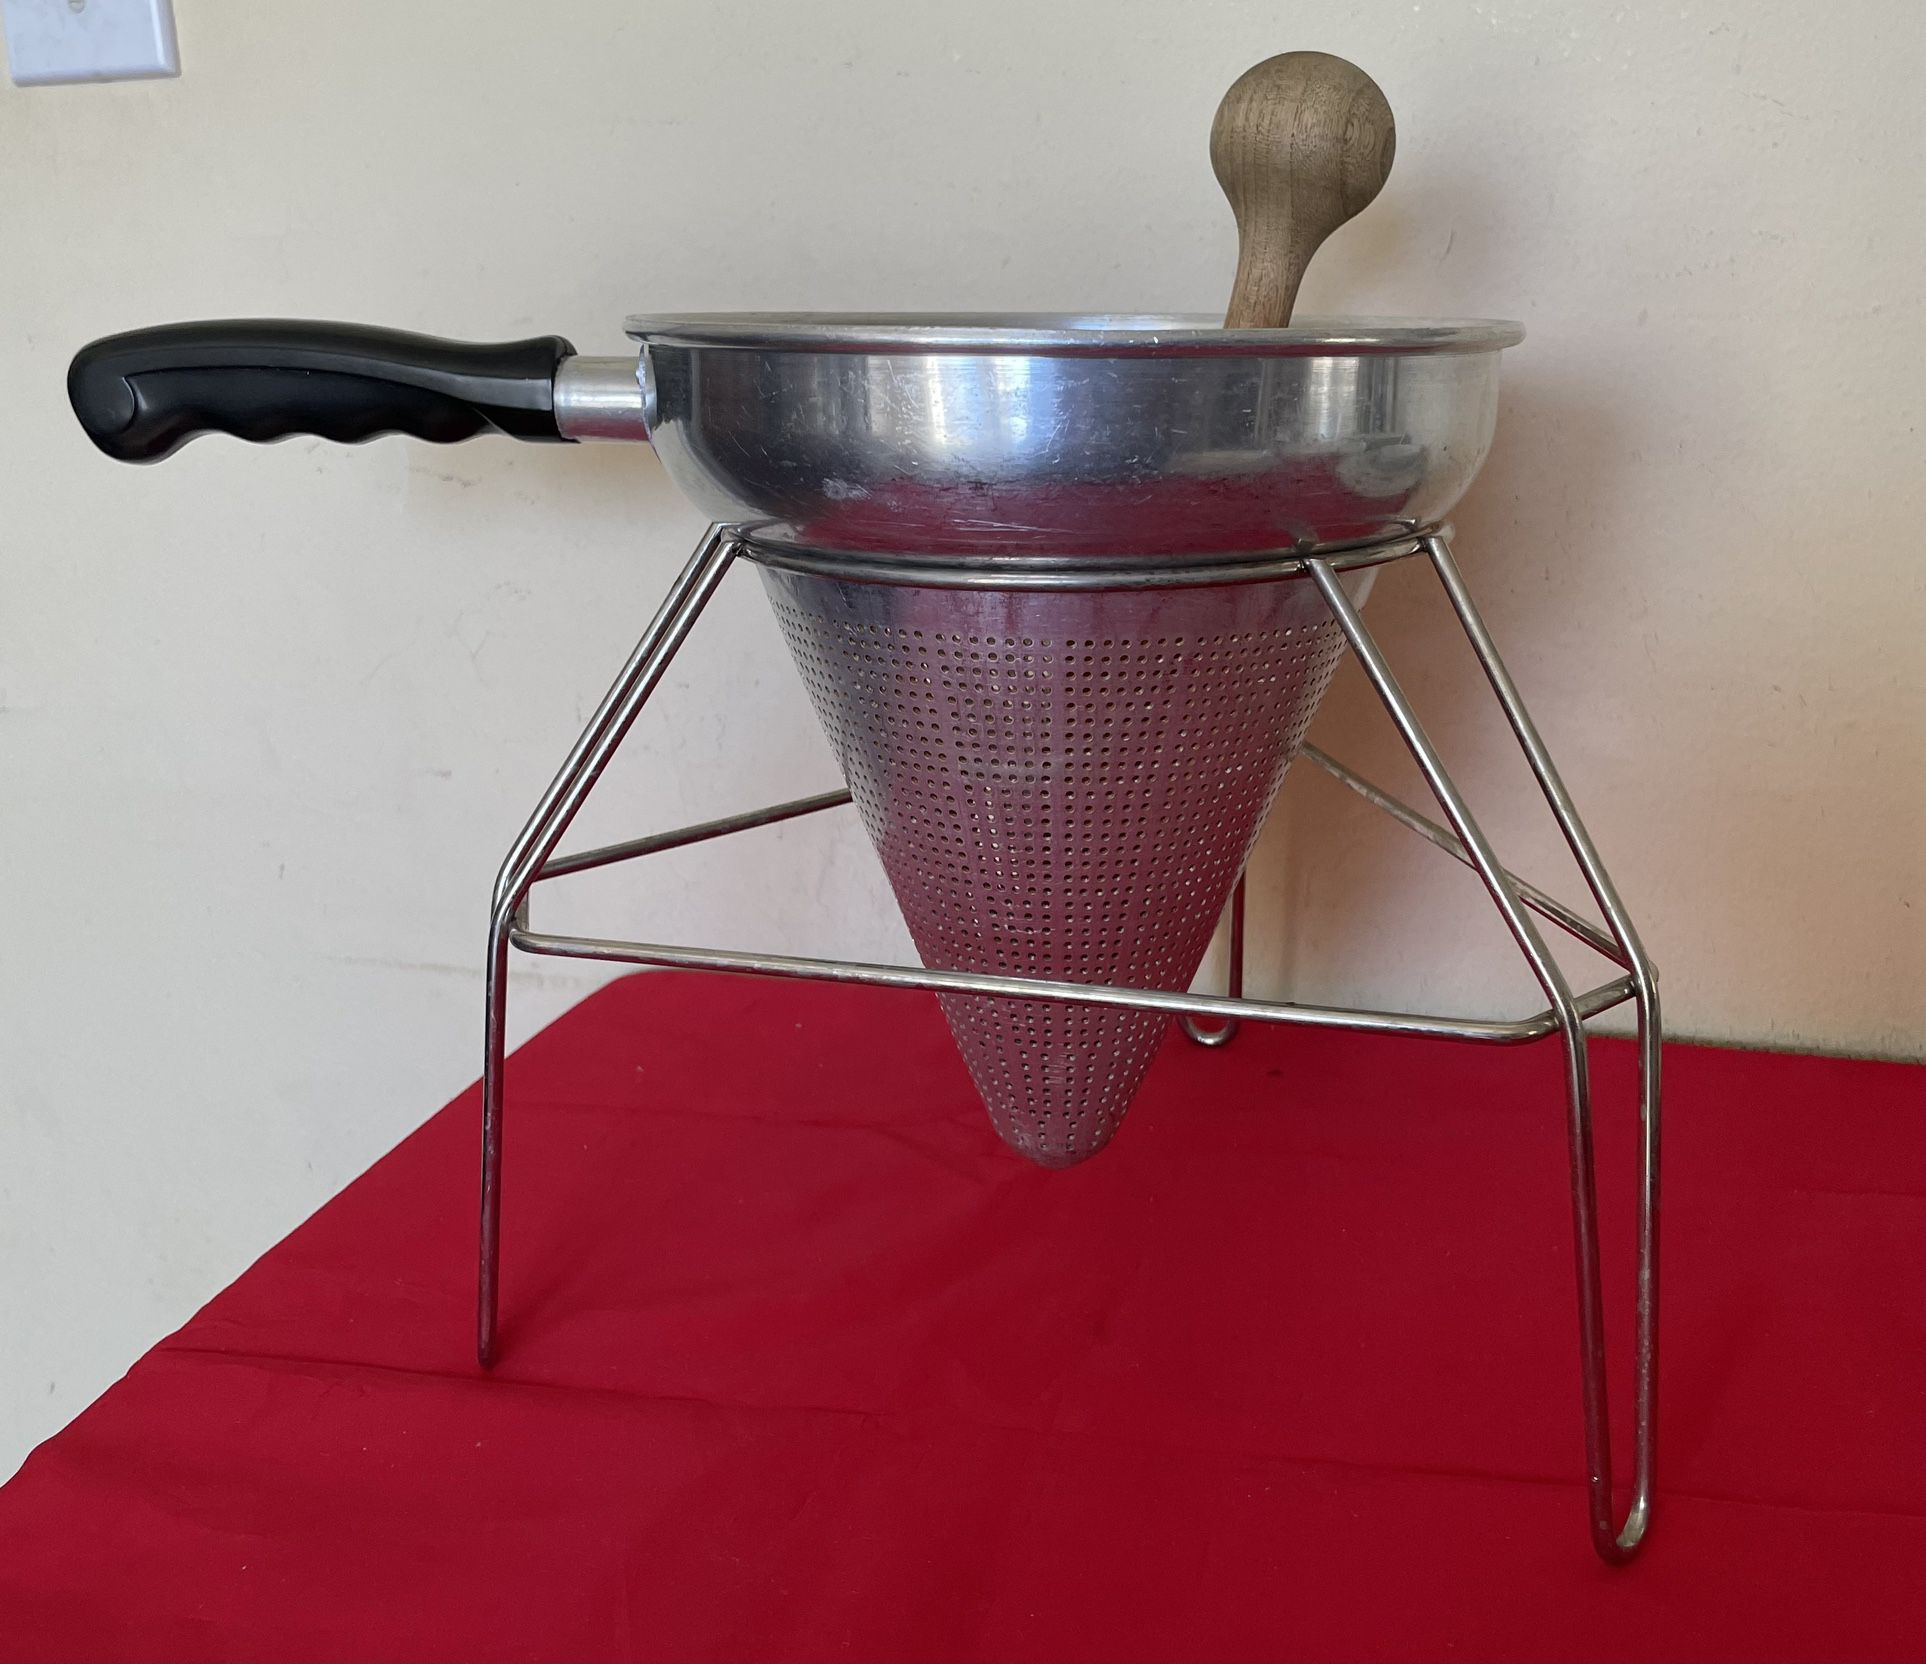 Vintage Canning Sieve/ Strainer Cone With Wood Pestle & Stand Excellent Condition See More Pictures 